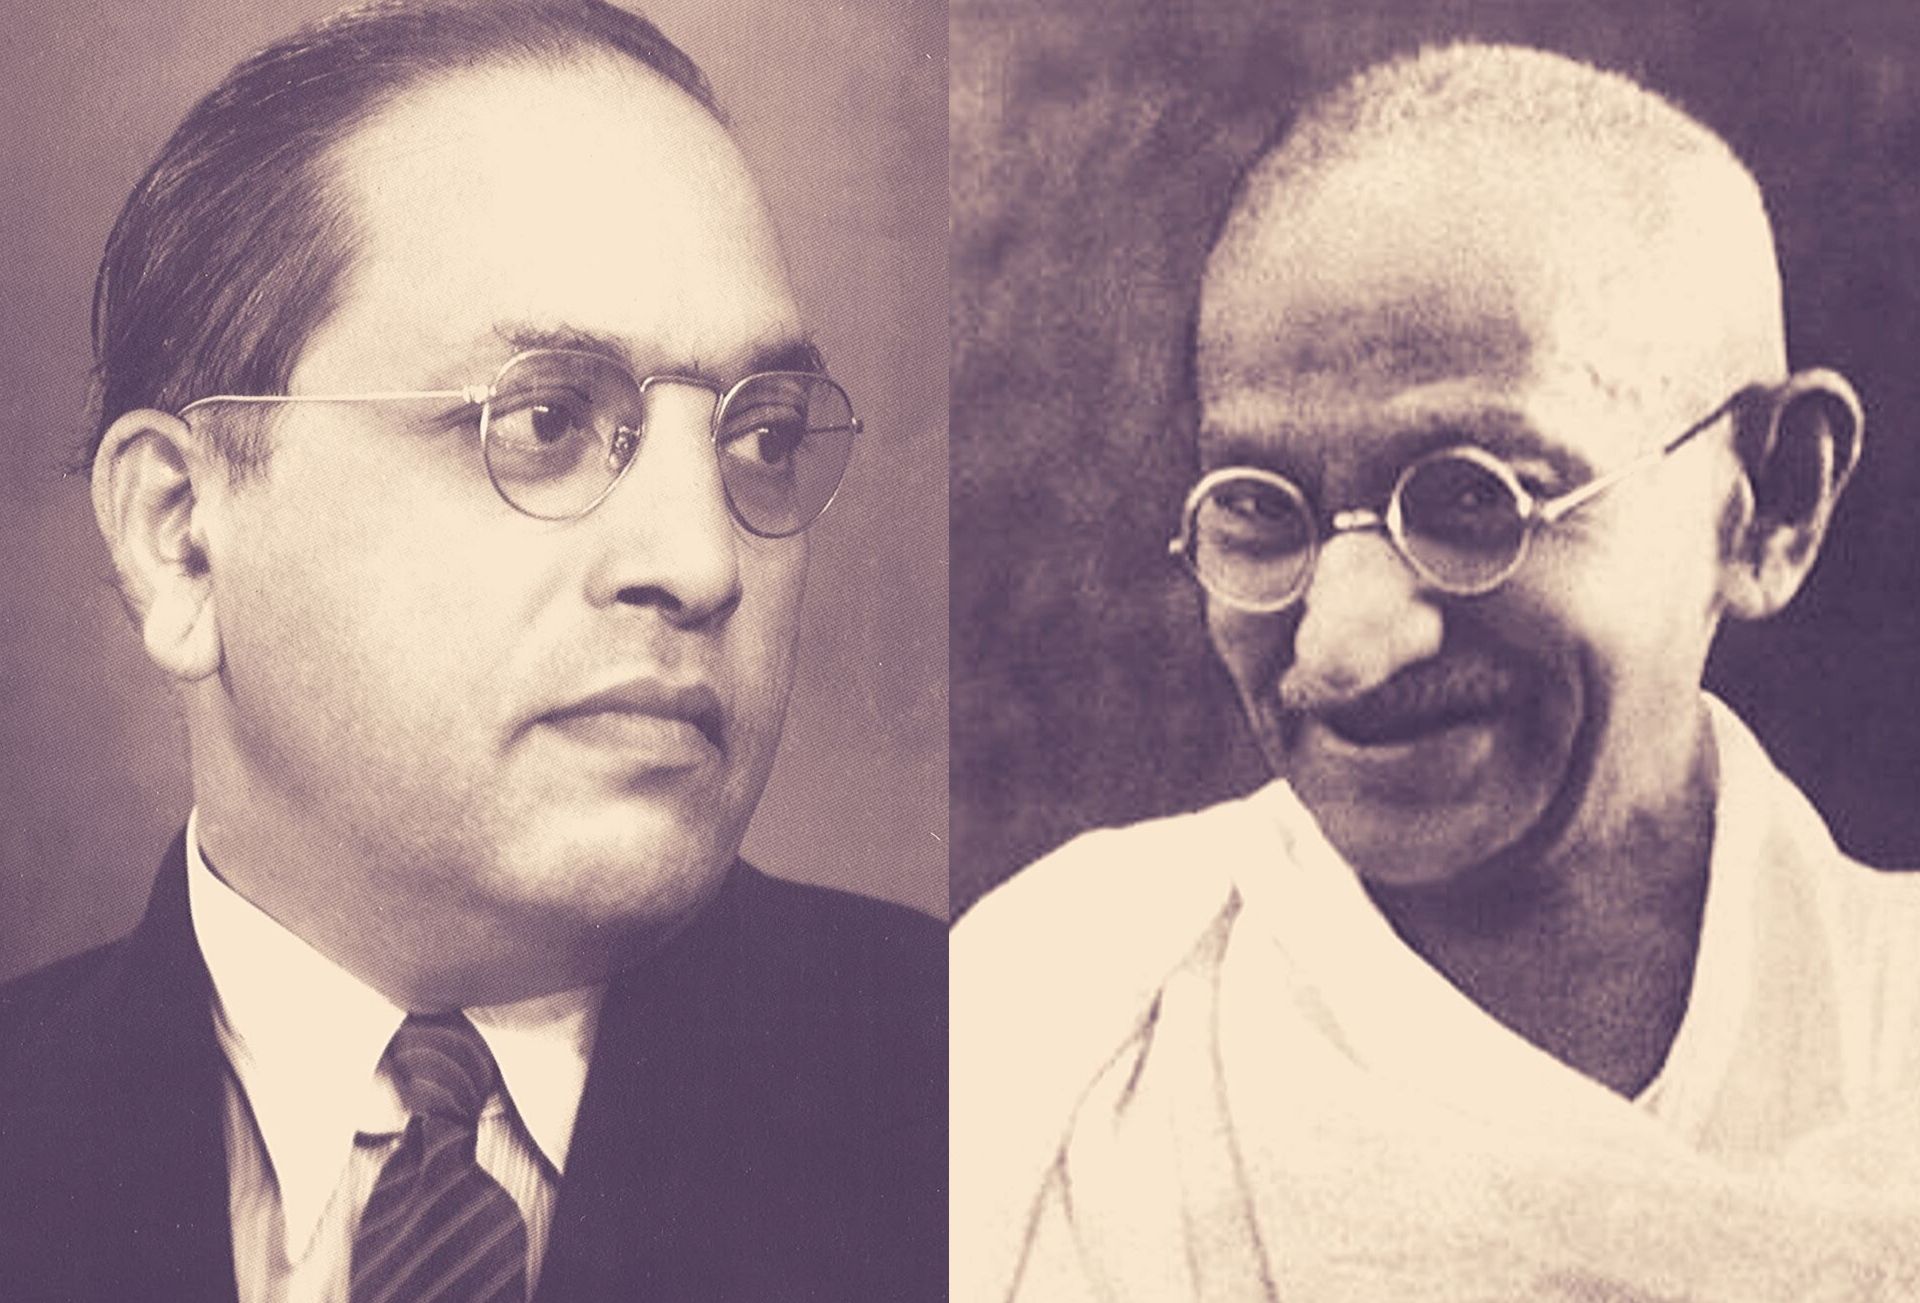 Poona Pact: Myths about Gandhi and the calumnies. A few random thoughts